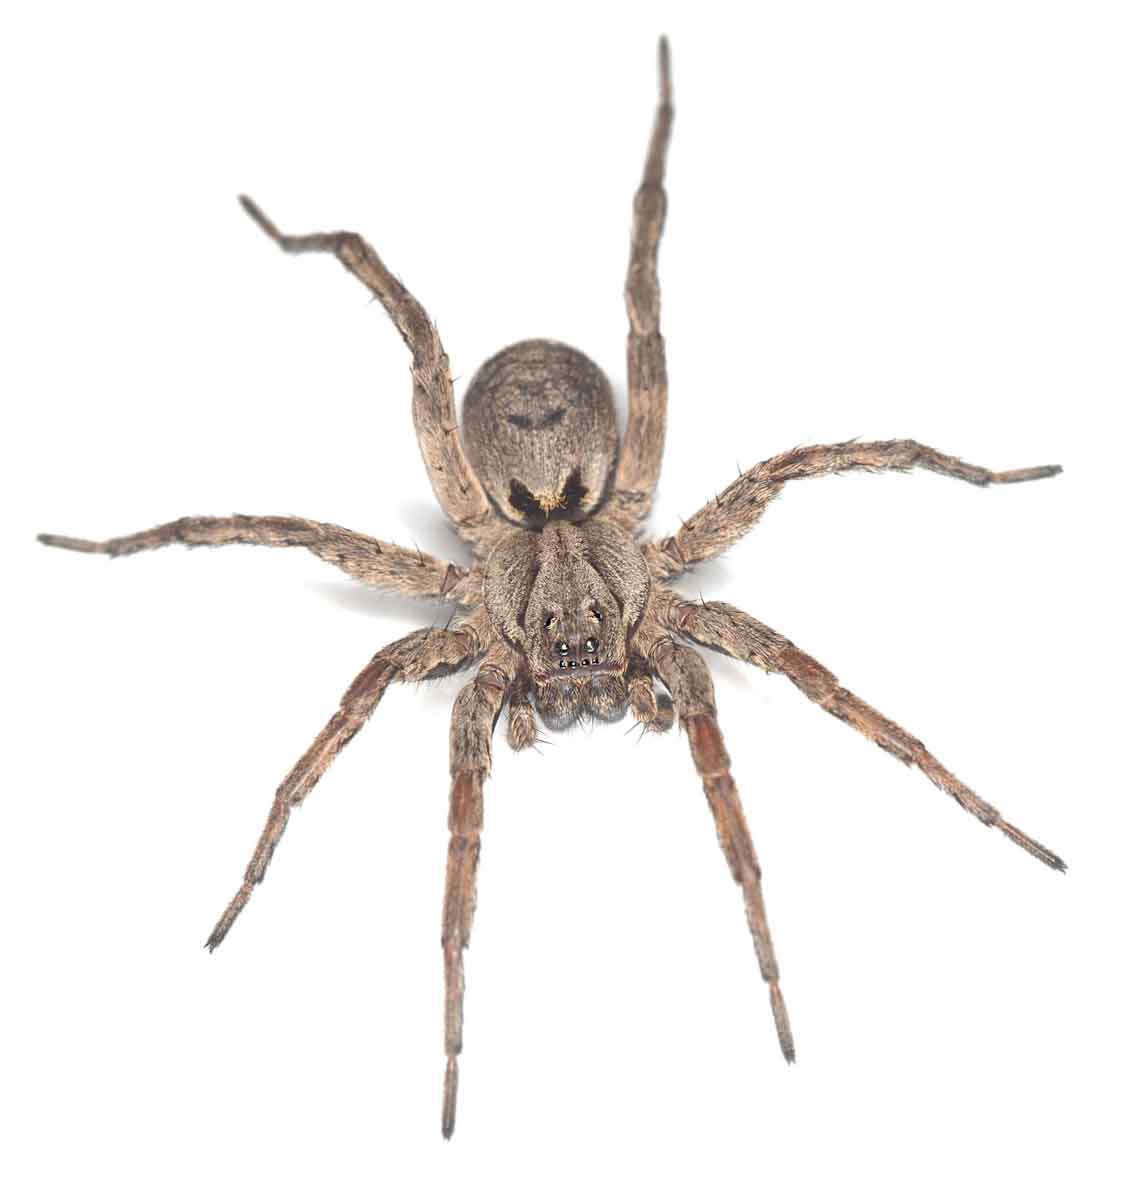 Wolf Spider pest control experts